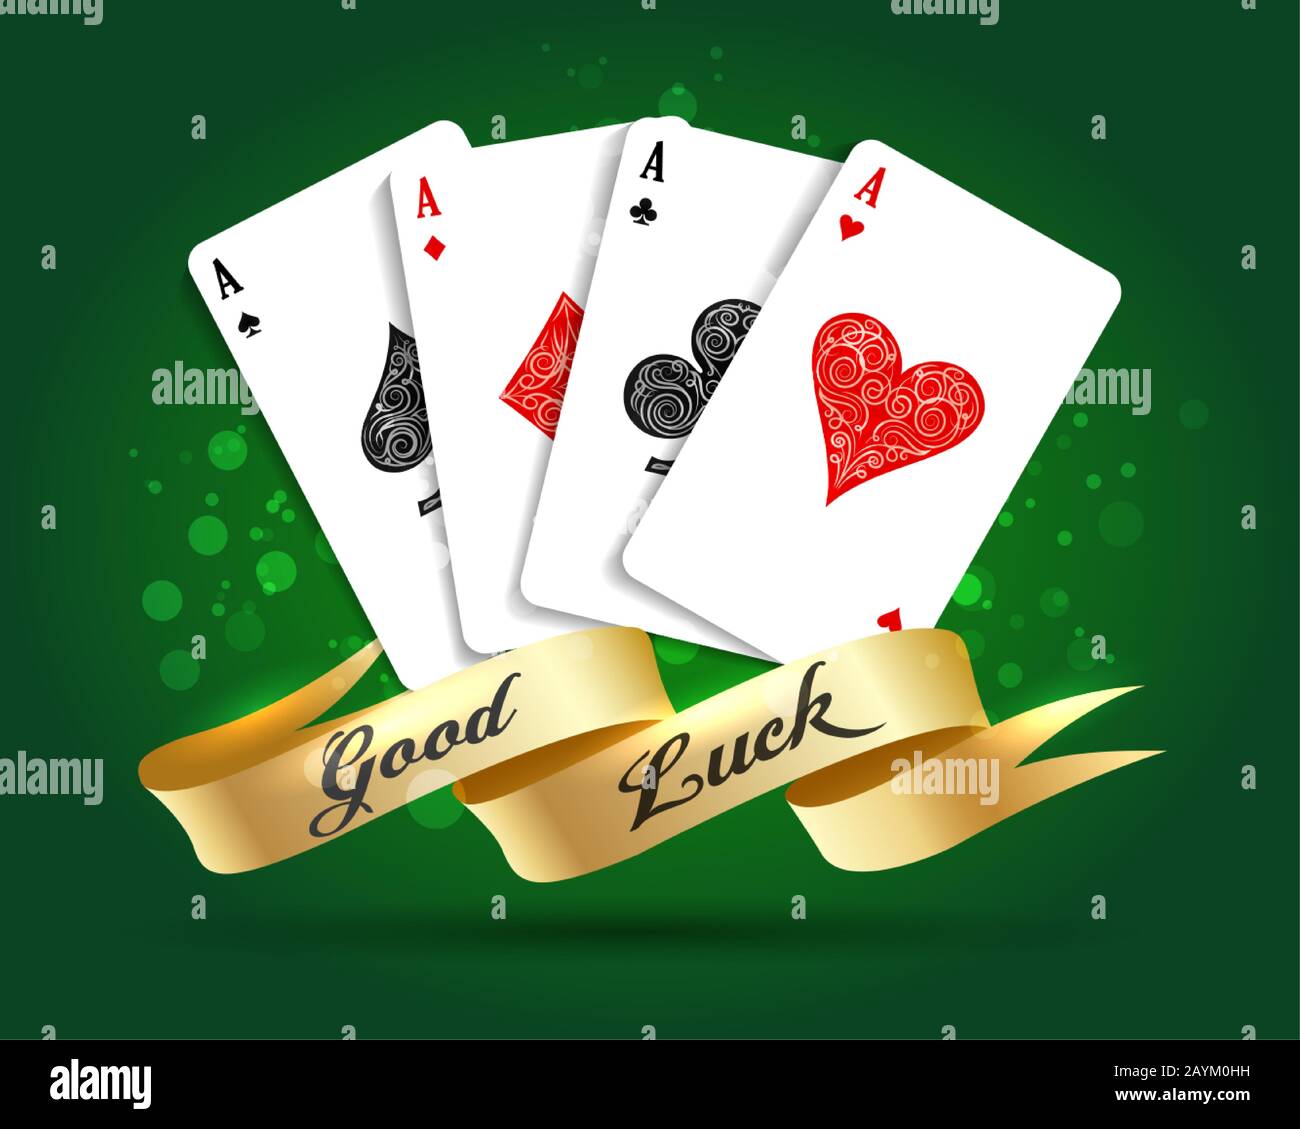 Four aces playing cards spades hearts diamonds clubs and ribbon with wording Good luck. Vector illustration. Stock Vector